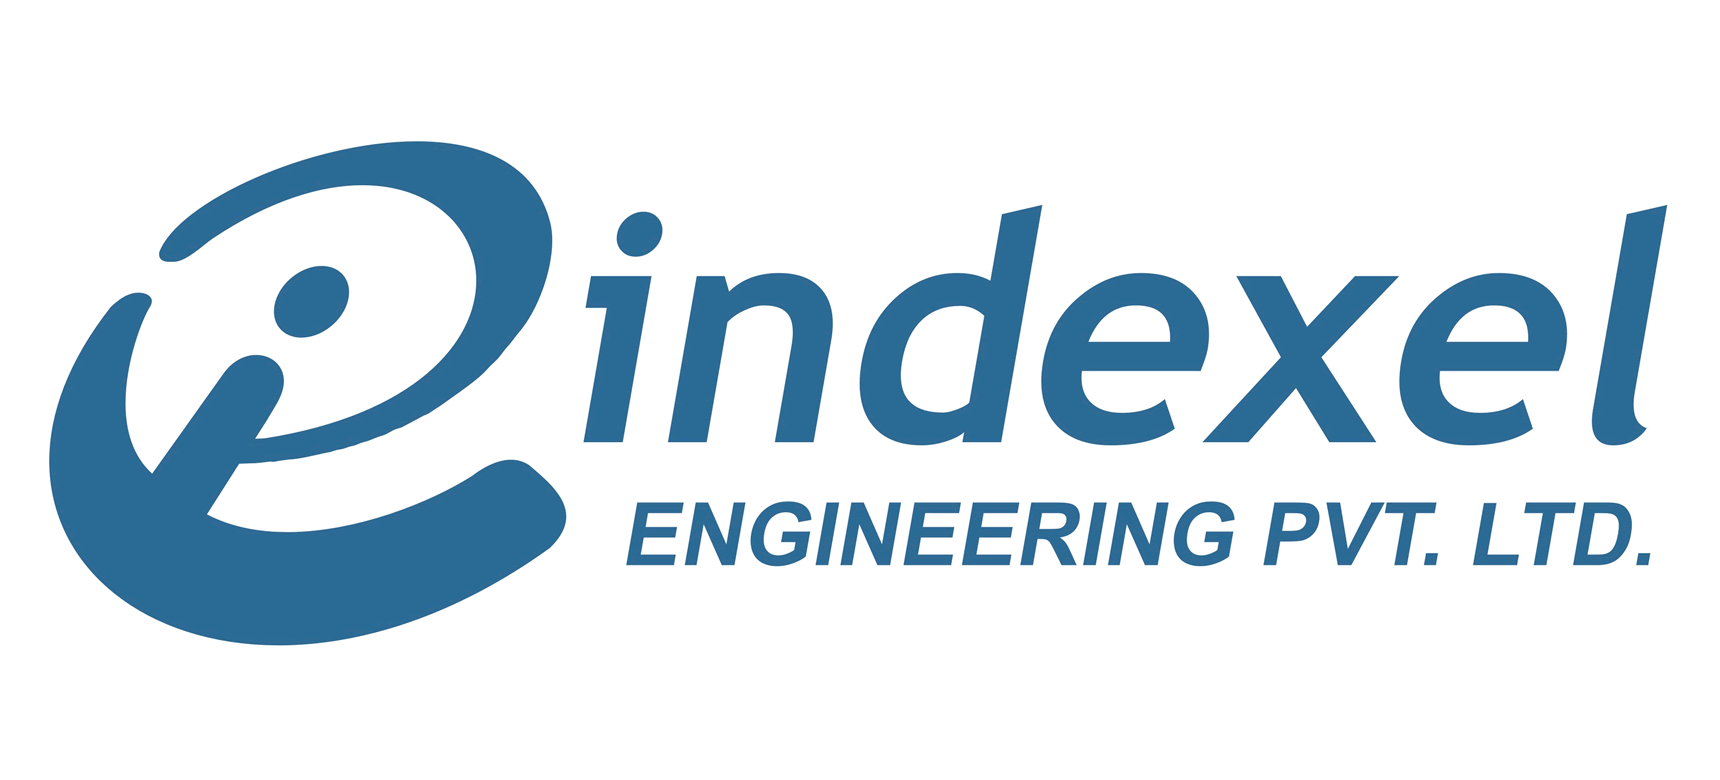 Johns Automation and Electrical Panel Customer - indexel engineering pvt ltd